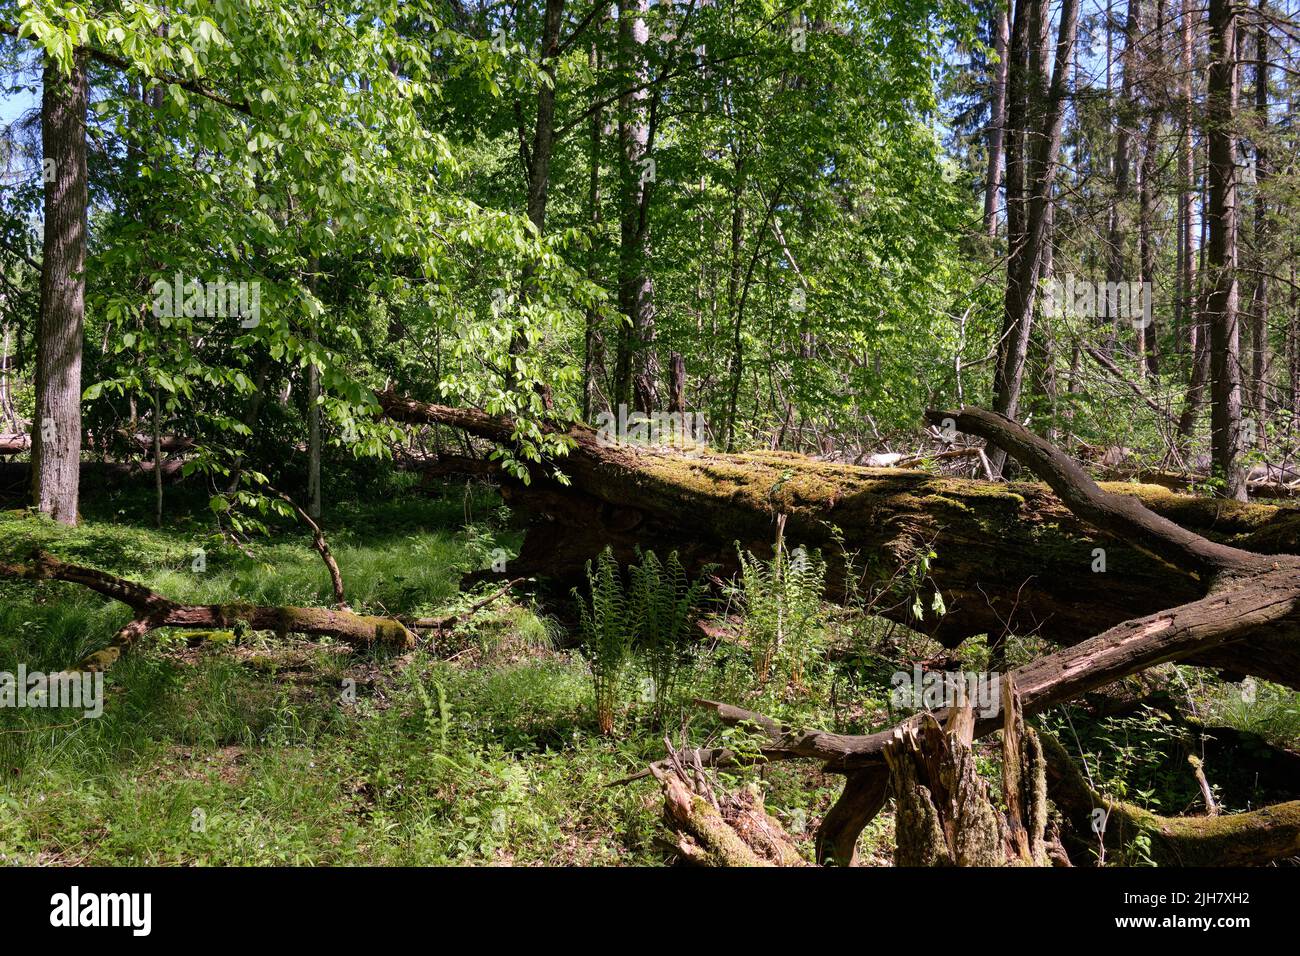 Oak and hornbeam tree deciduous forest in spring with broken oak tree in foreground, Bialowieza Forest, Poland, Europe Stock Photo